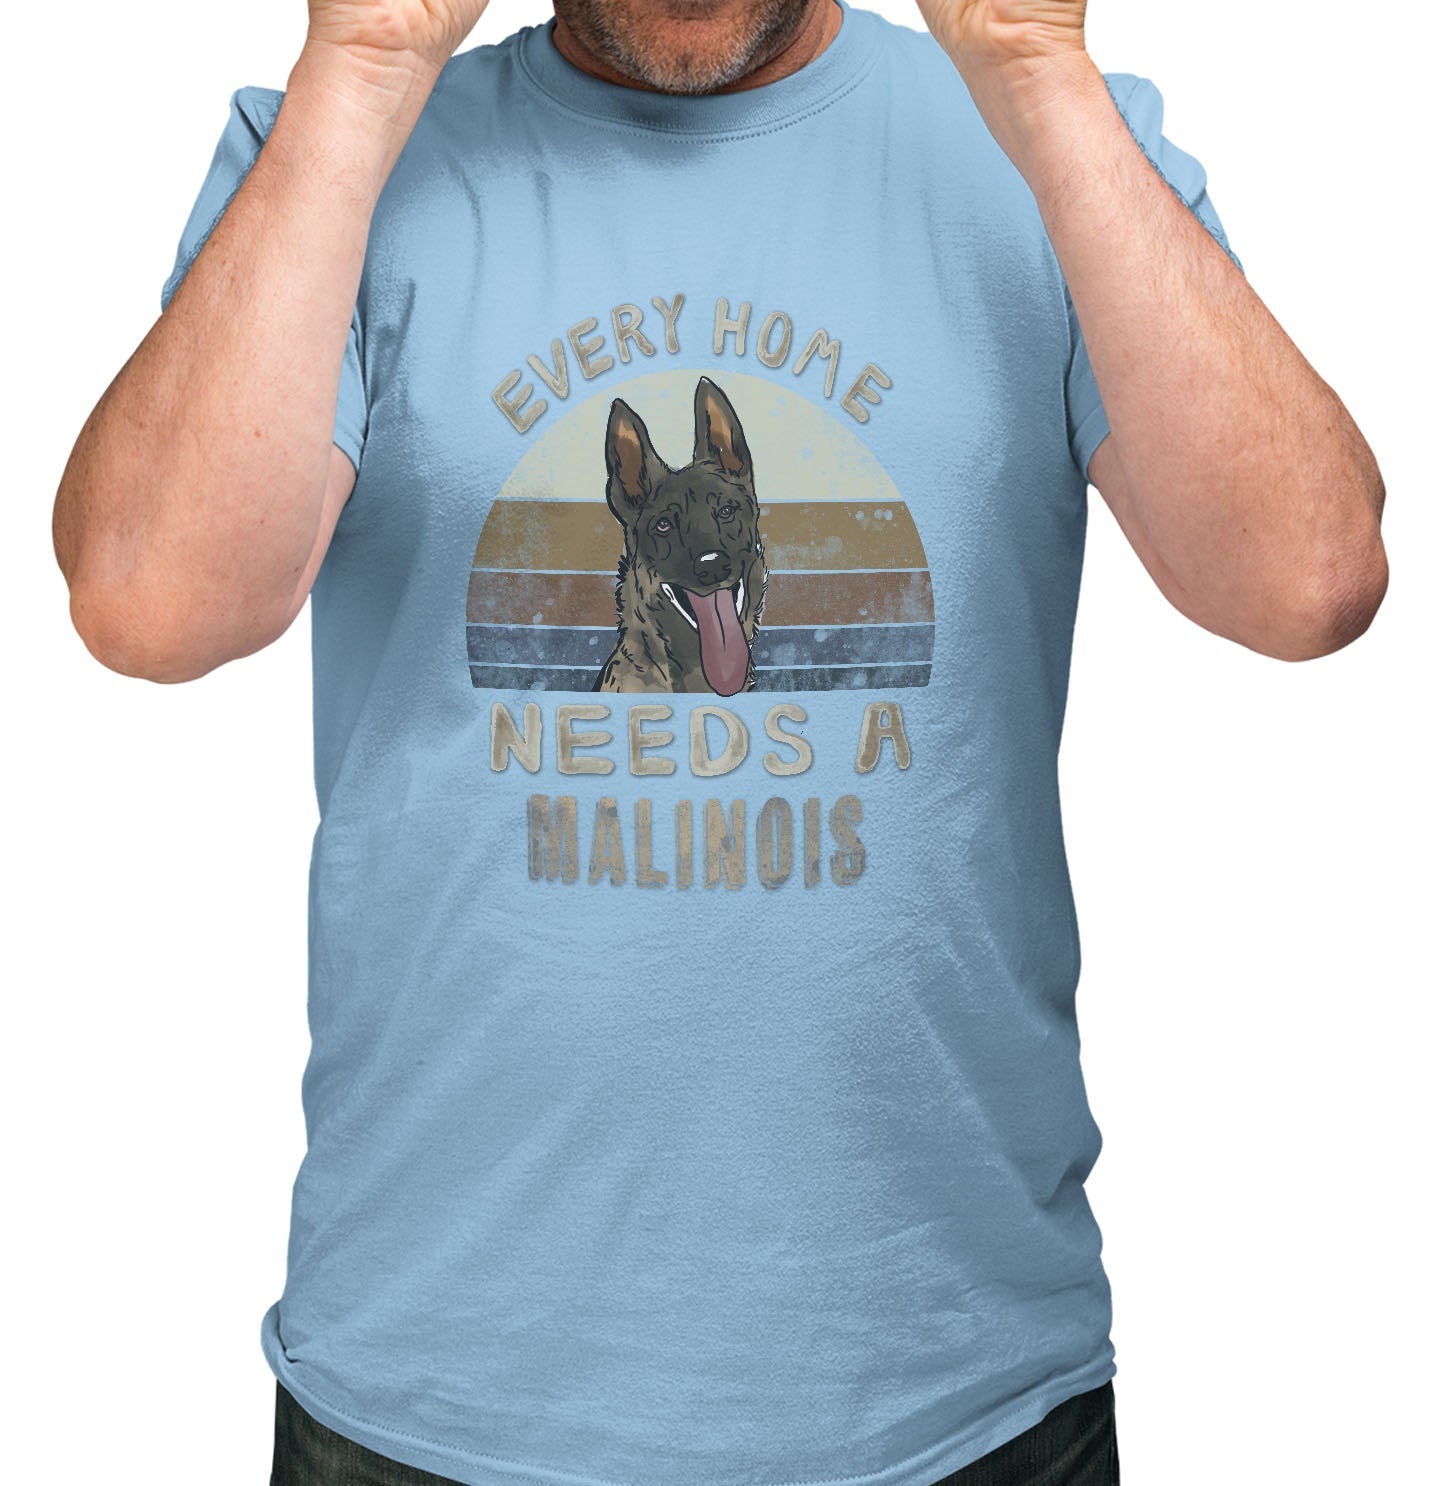 Every Home Needs a Belgian Malinois - Adult Unisex T-Shirt